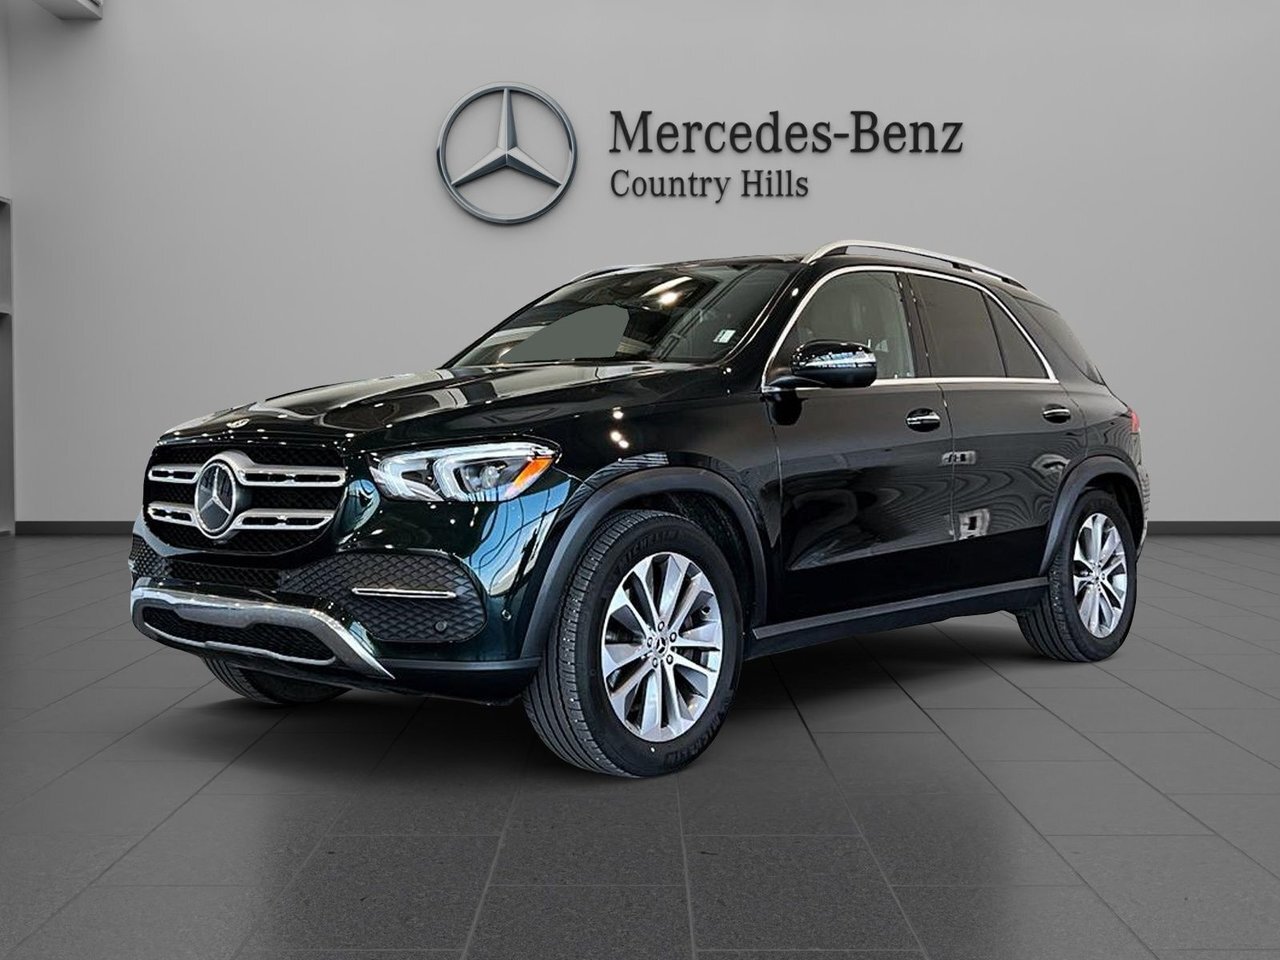 2022 Mercedes-Benz GLE350 4MATIC SUV Warranty until 2028 + 2 years PPM!